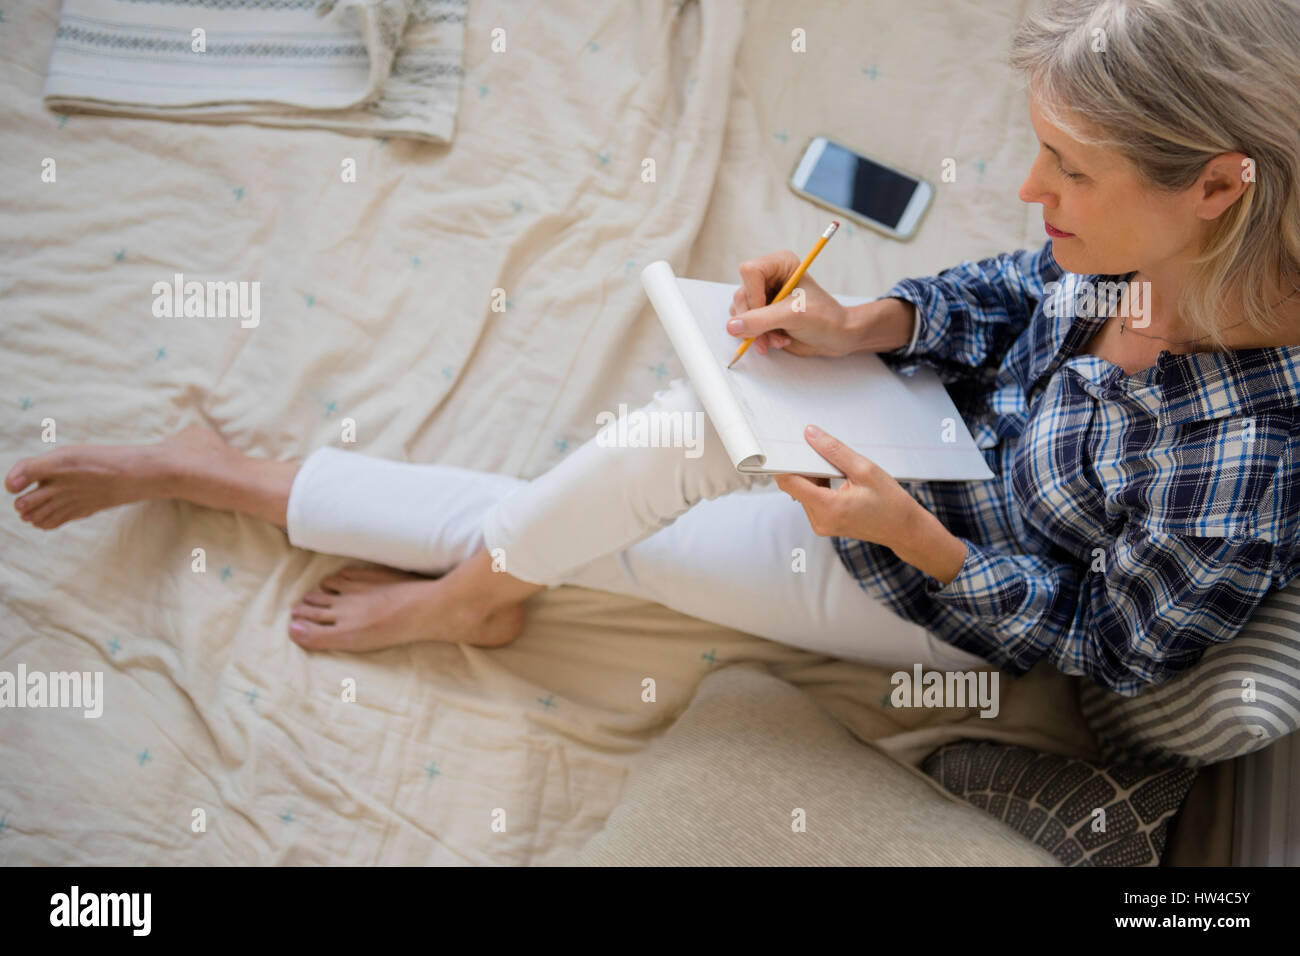 Caucasian woman writing on cell phone Banque D'Images